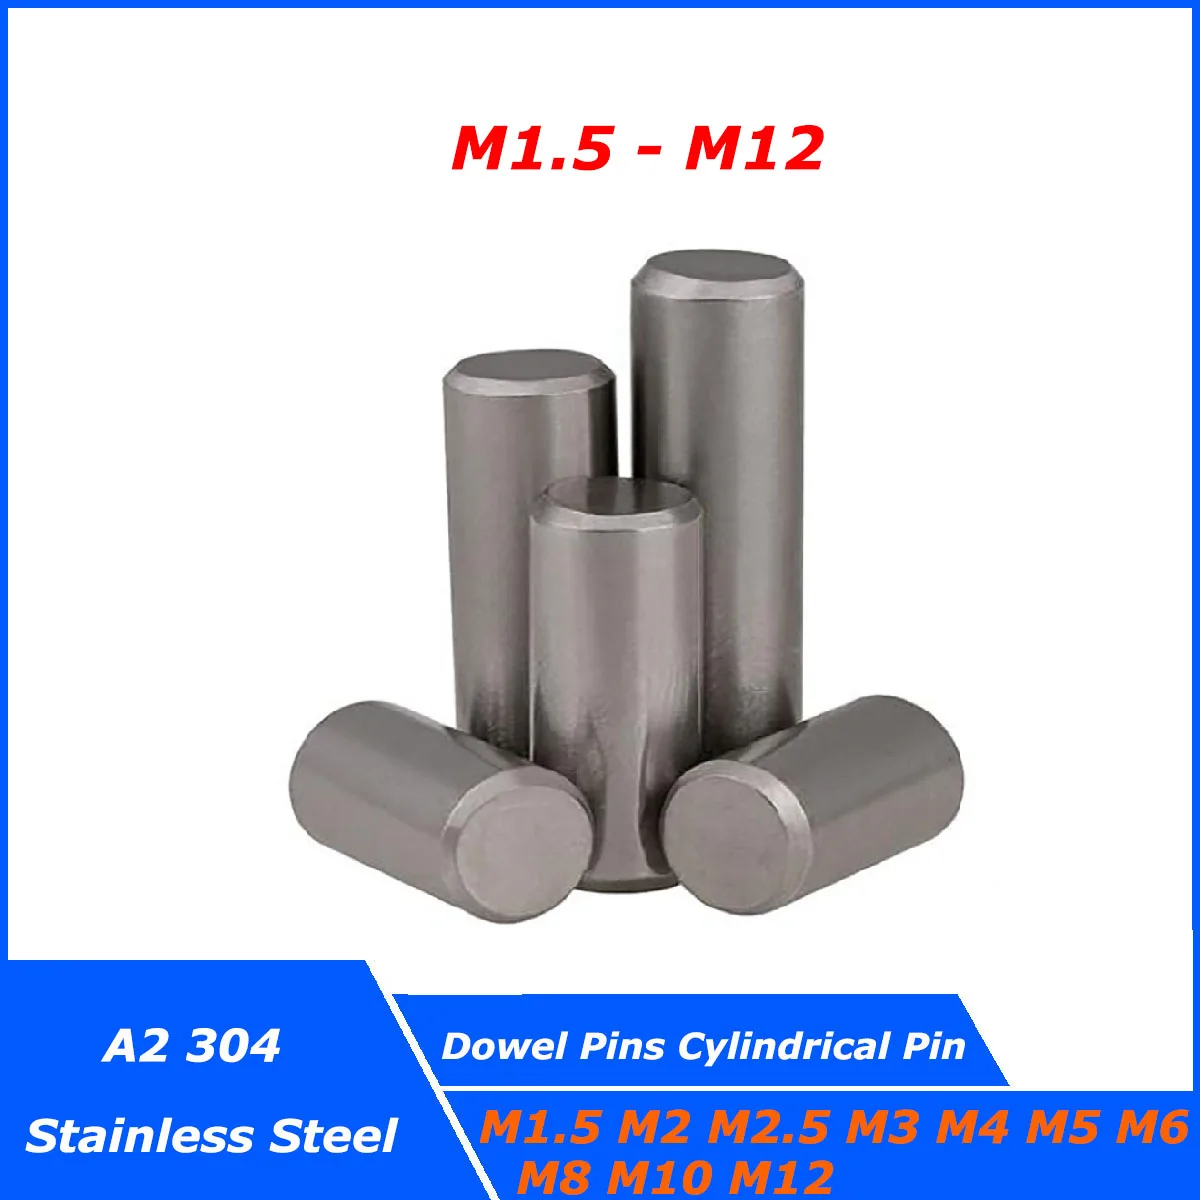 

GB119 Cylindrical Pin Locating Dowel A2 304 Stainless Steel Fixed Shaft Solid Rod Ø M1.5 M2 M2.5 M3 M4 M5 M6 M8 M10 M12 mm